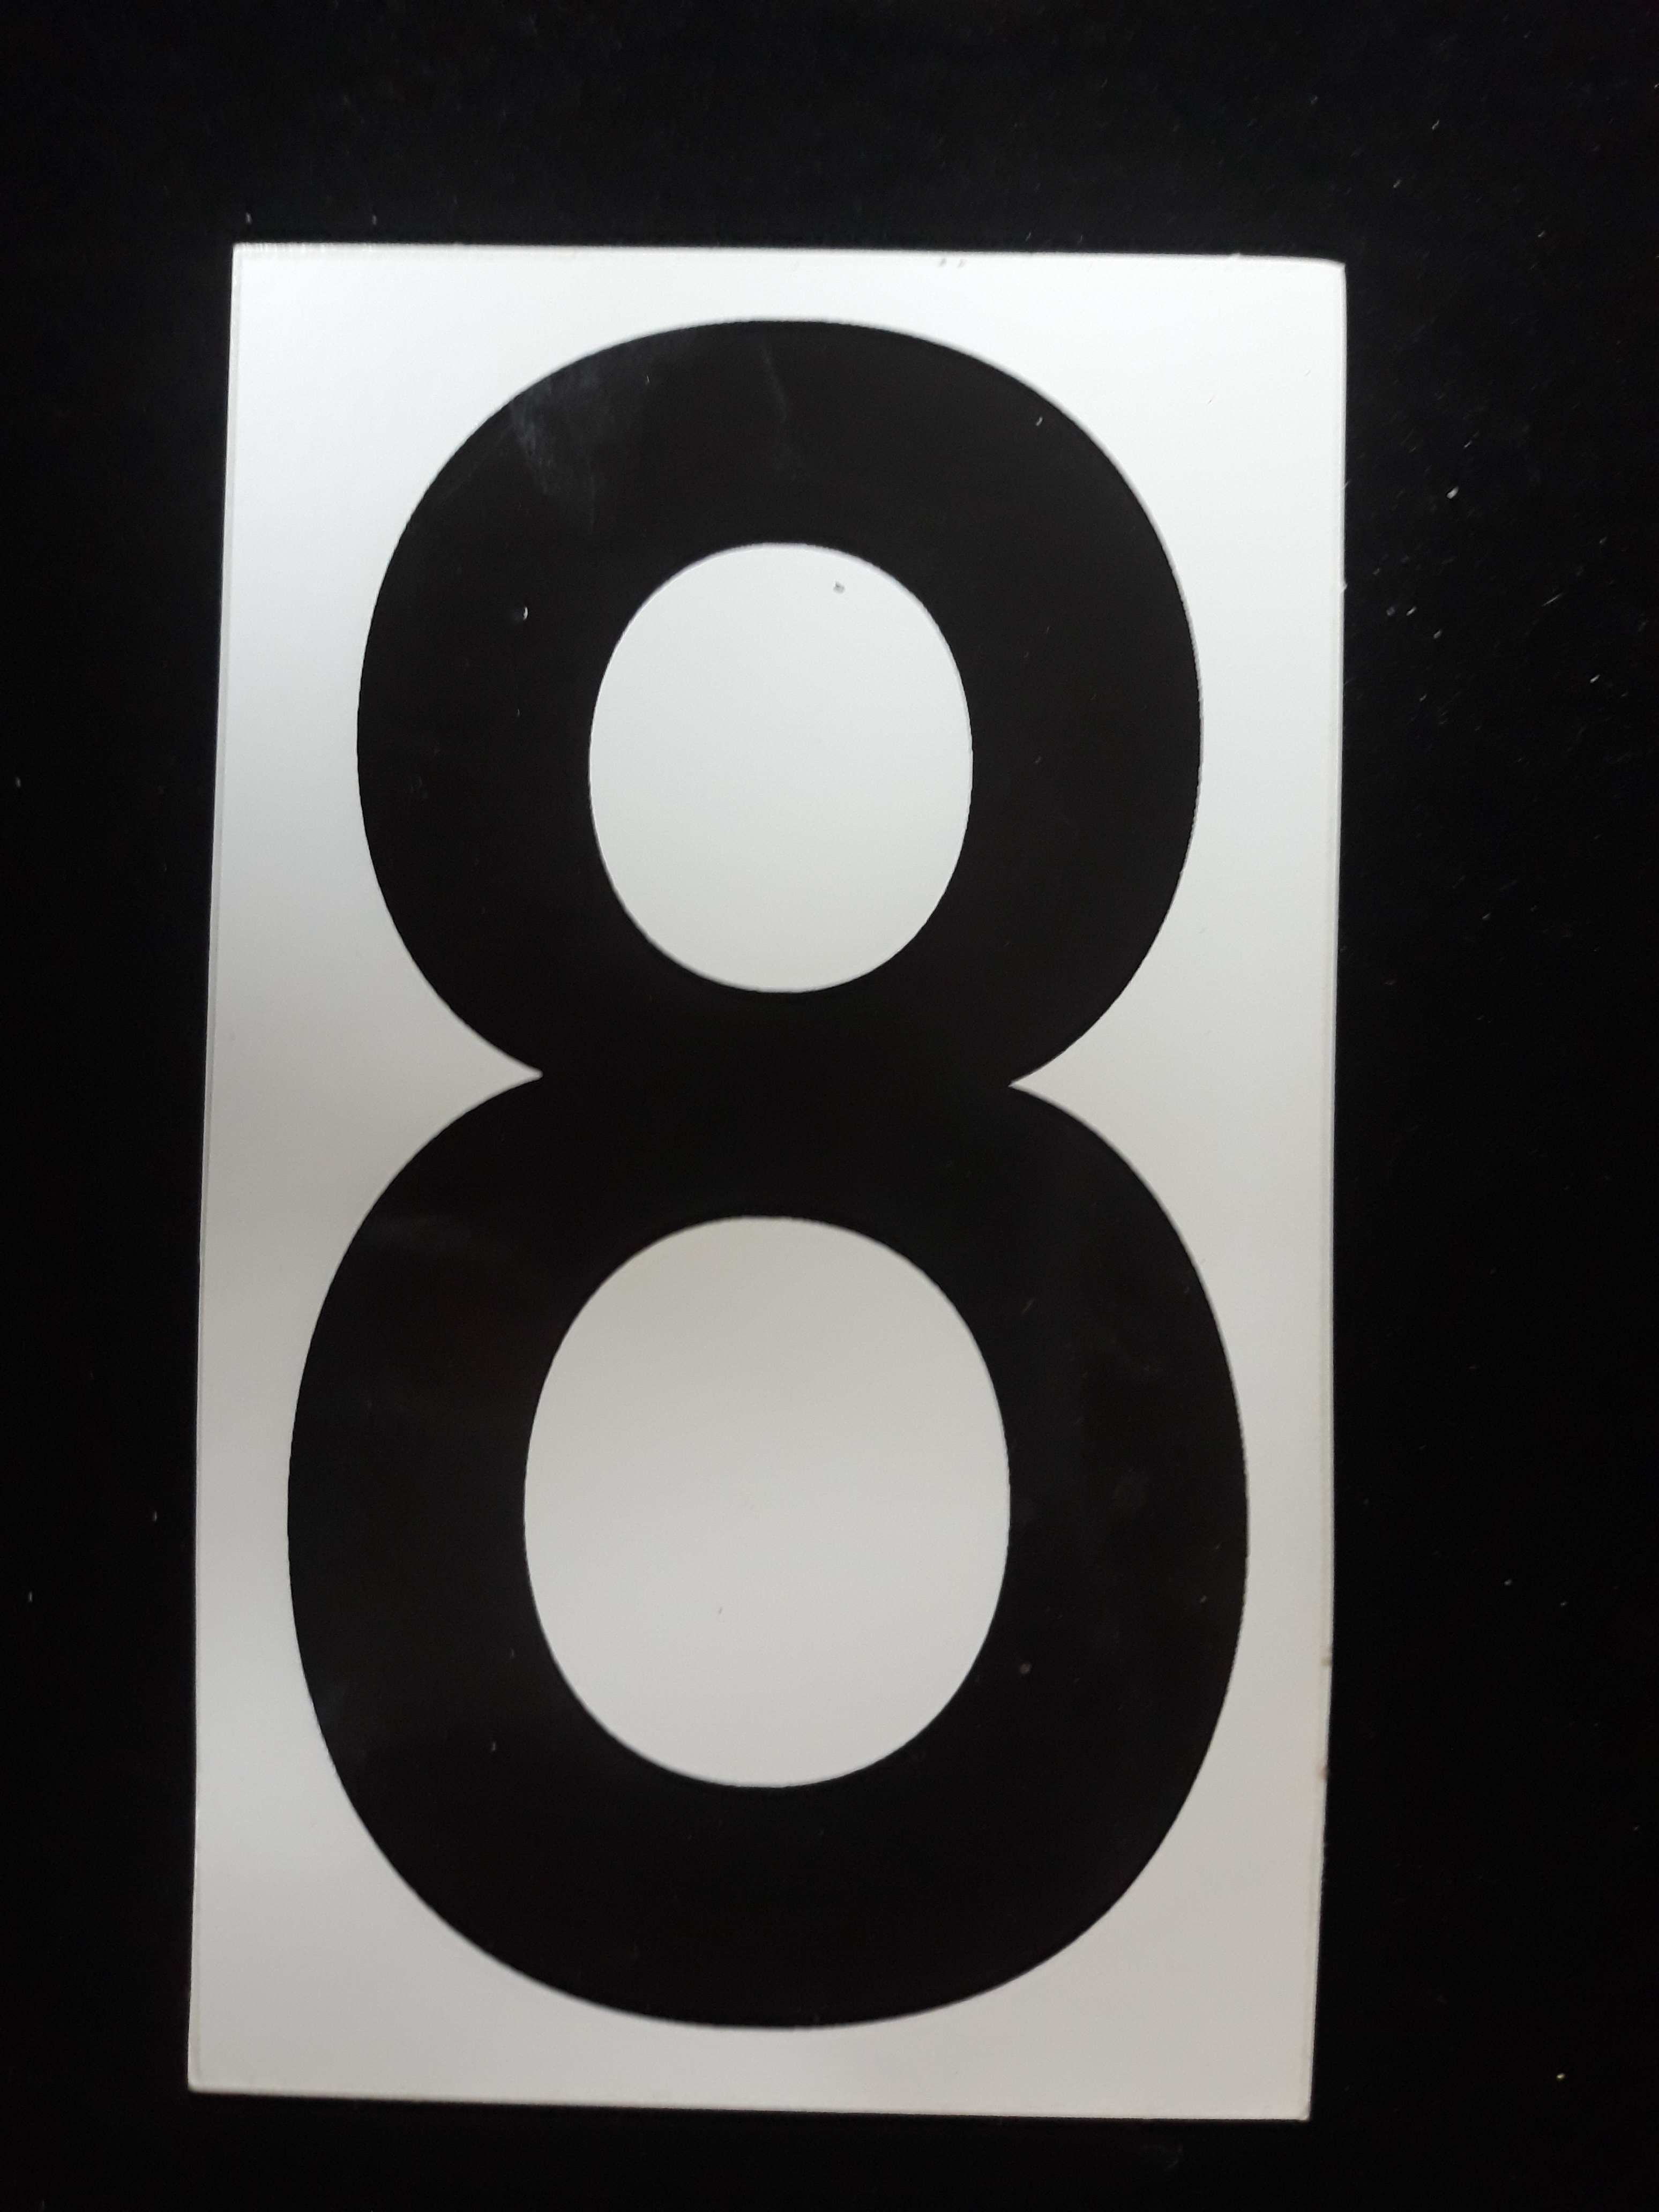 5" Sticker Decals Vinyl Adhesive Address Numbers Black & White No 0 Pack of 10 